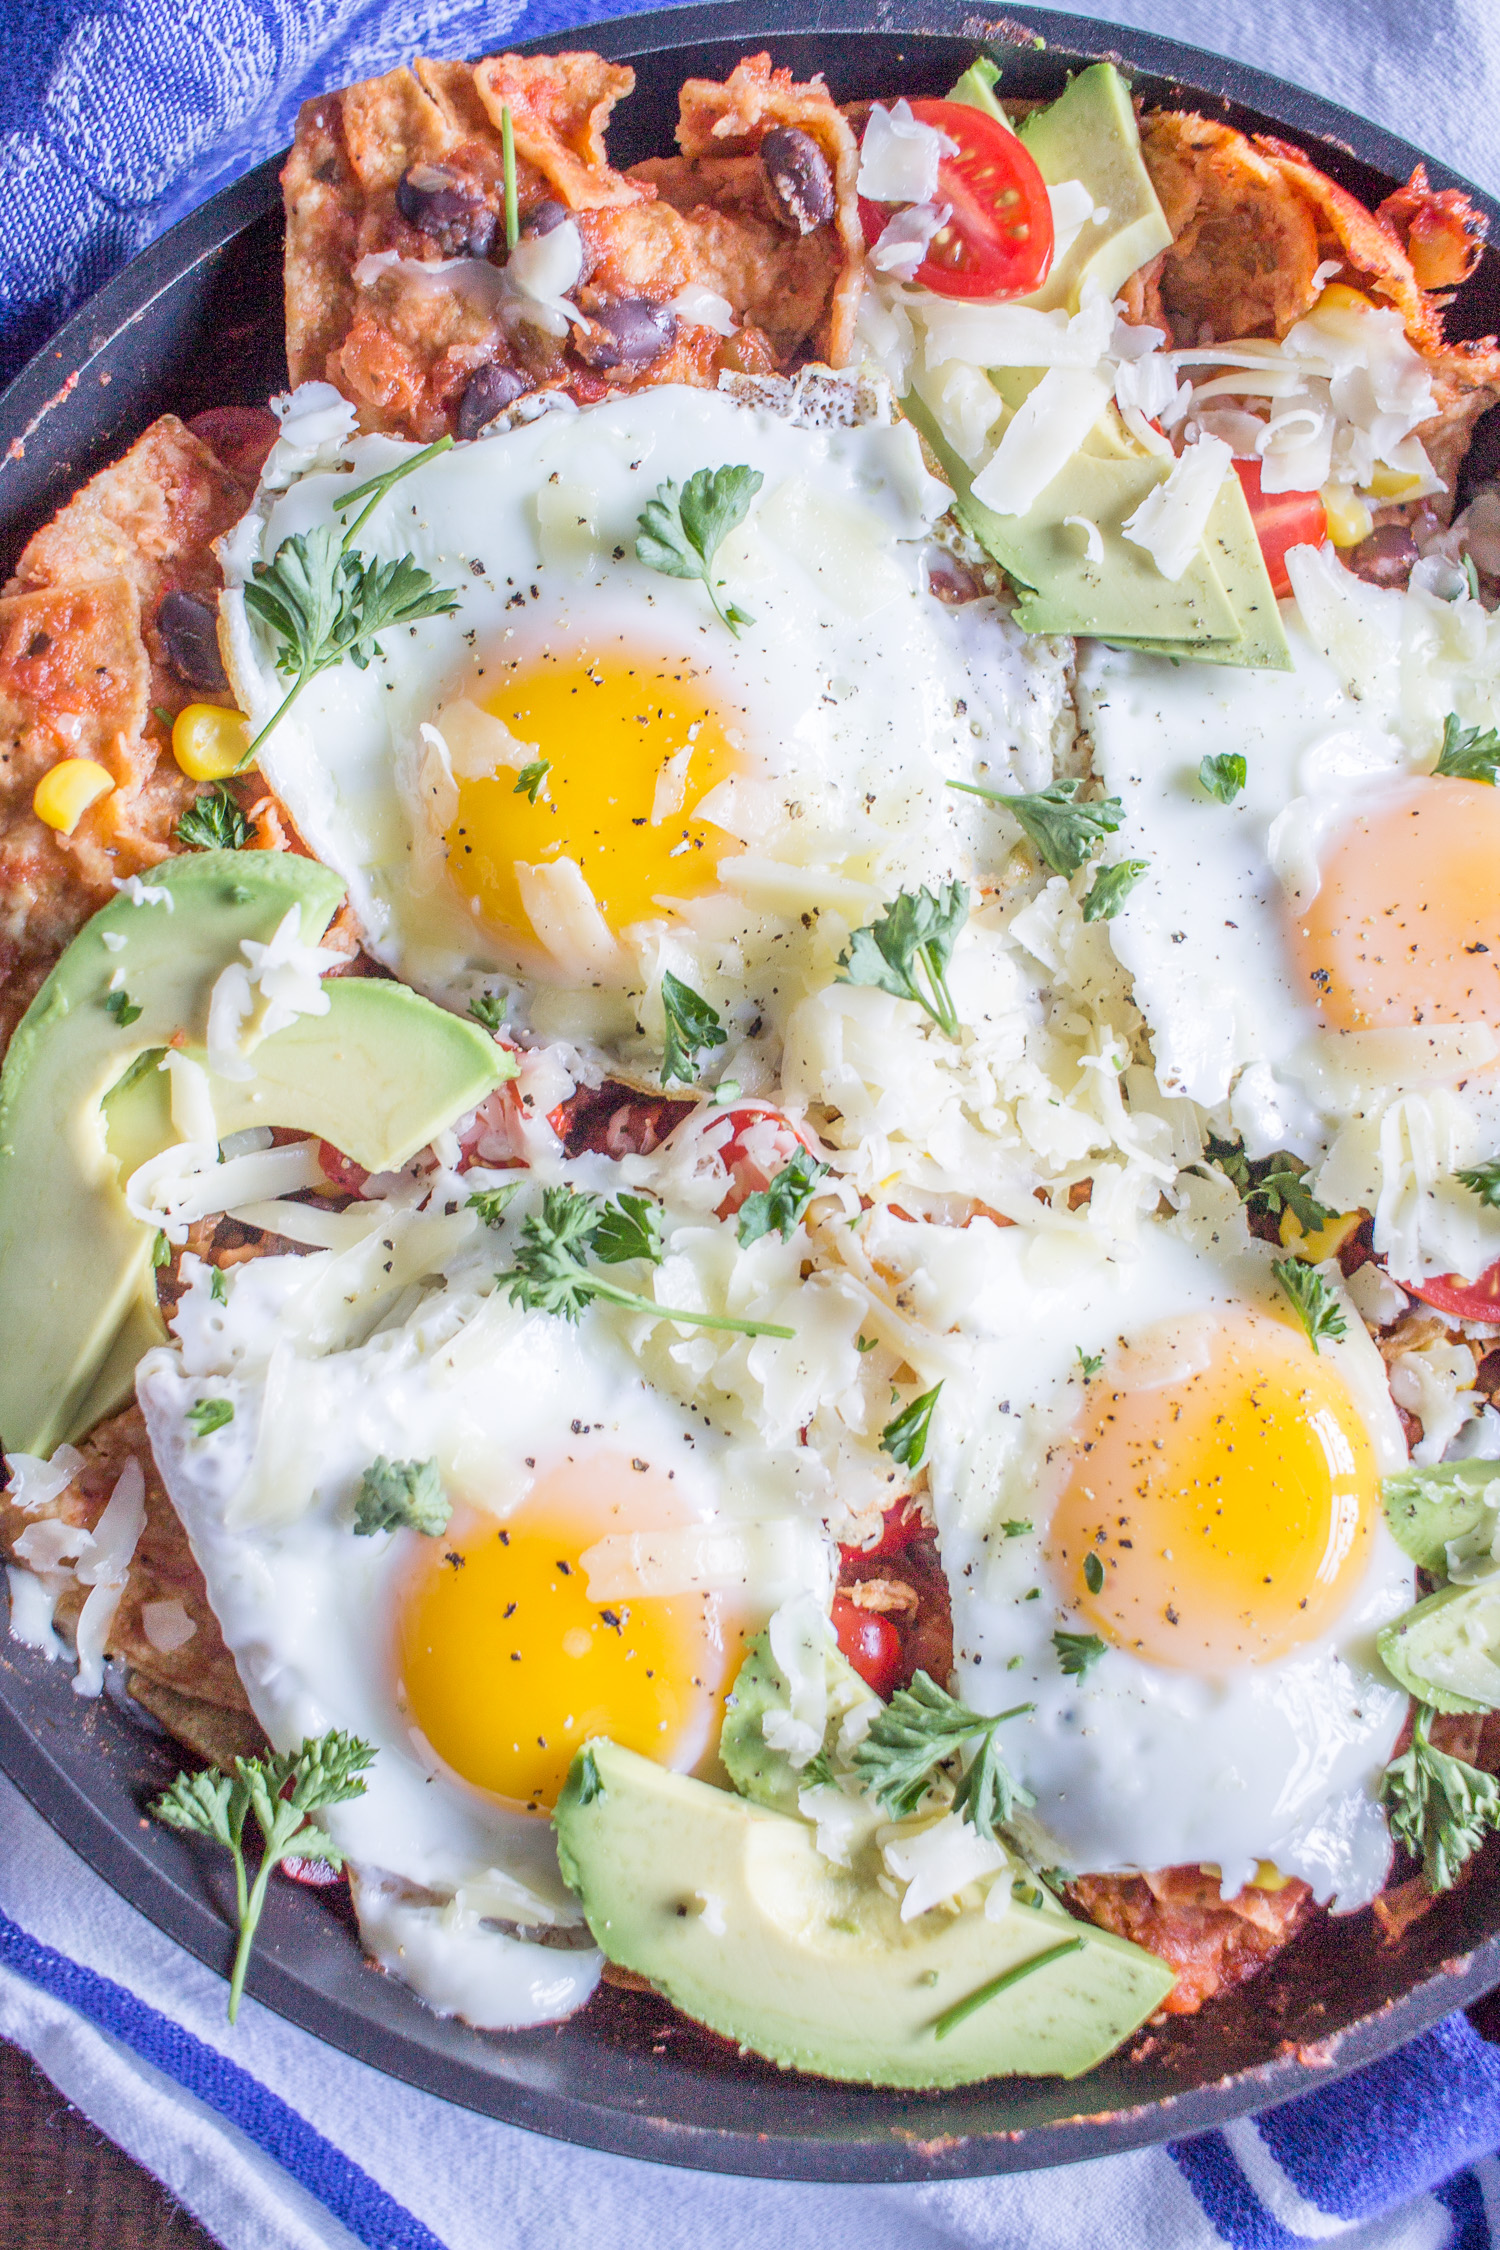 How to Make Chilaquiles